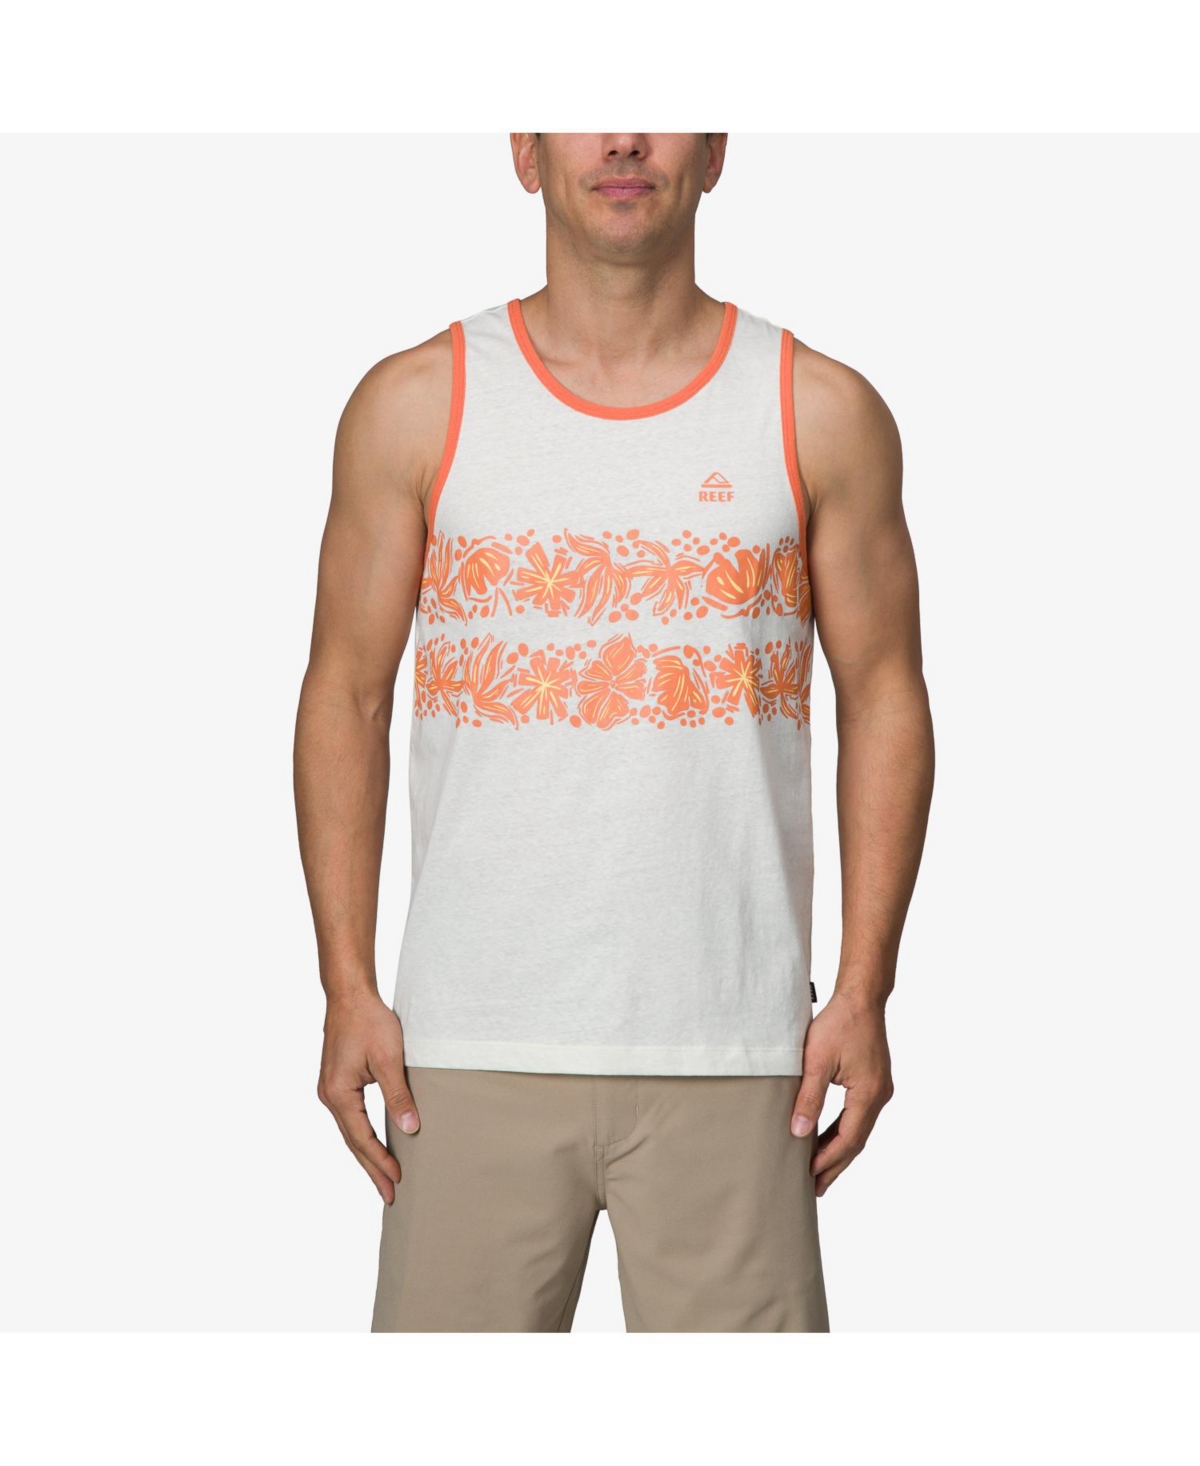 Men's Rory Floral Tank Top - Marshmallow